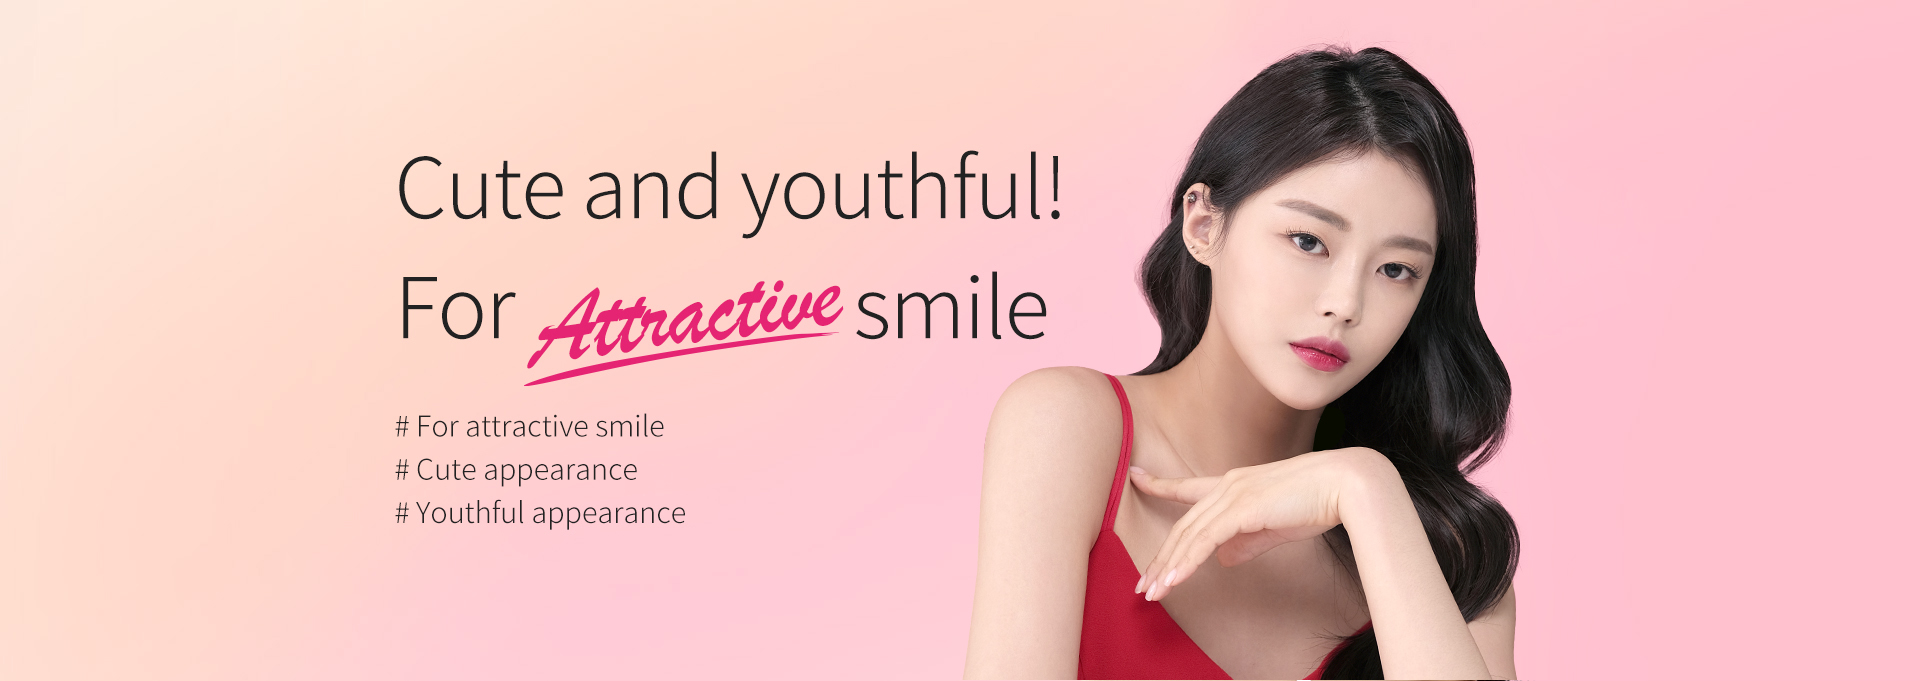 Cute and youthful! For Attractive smile